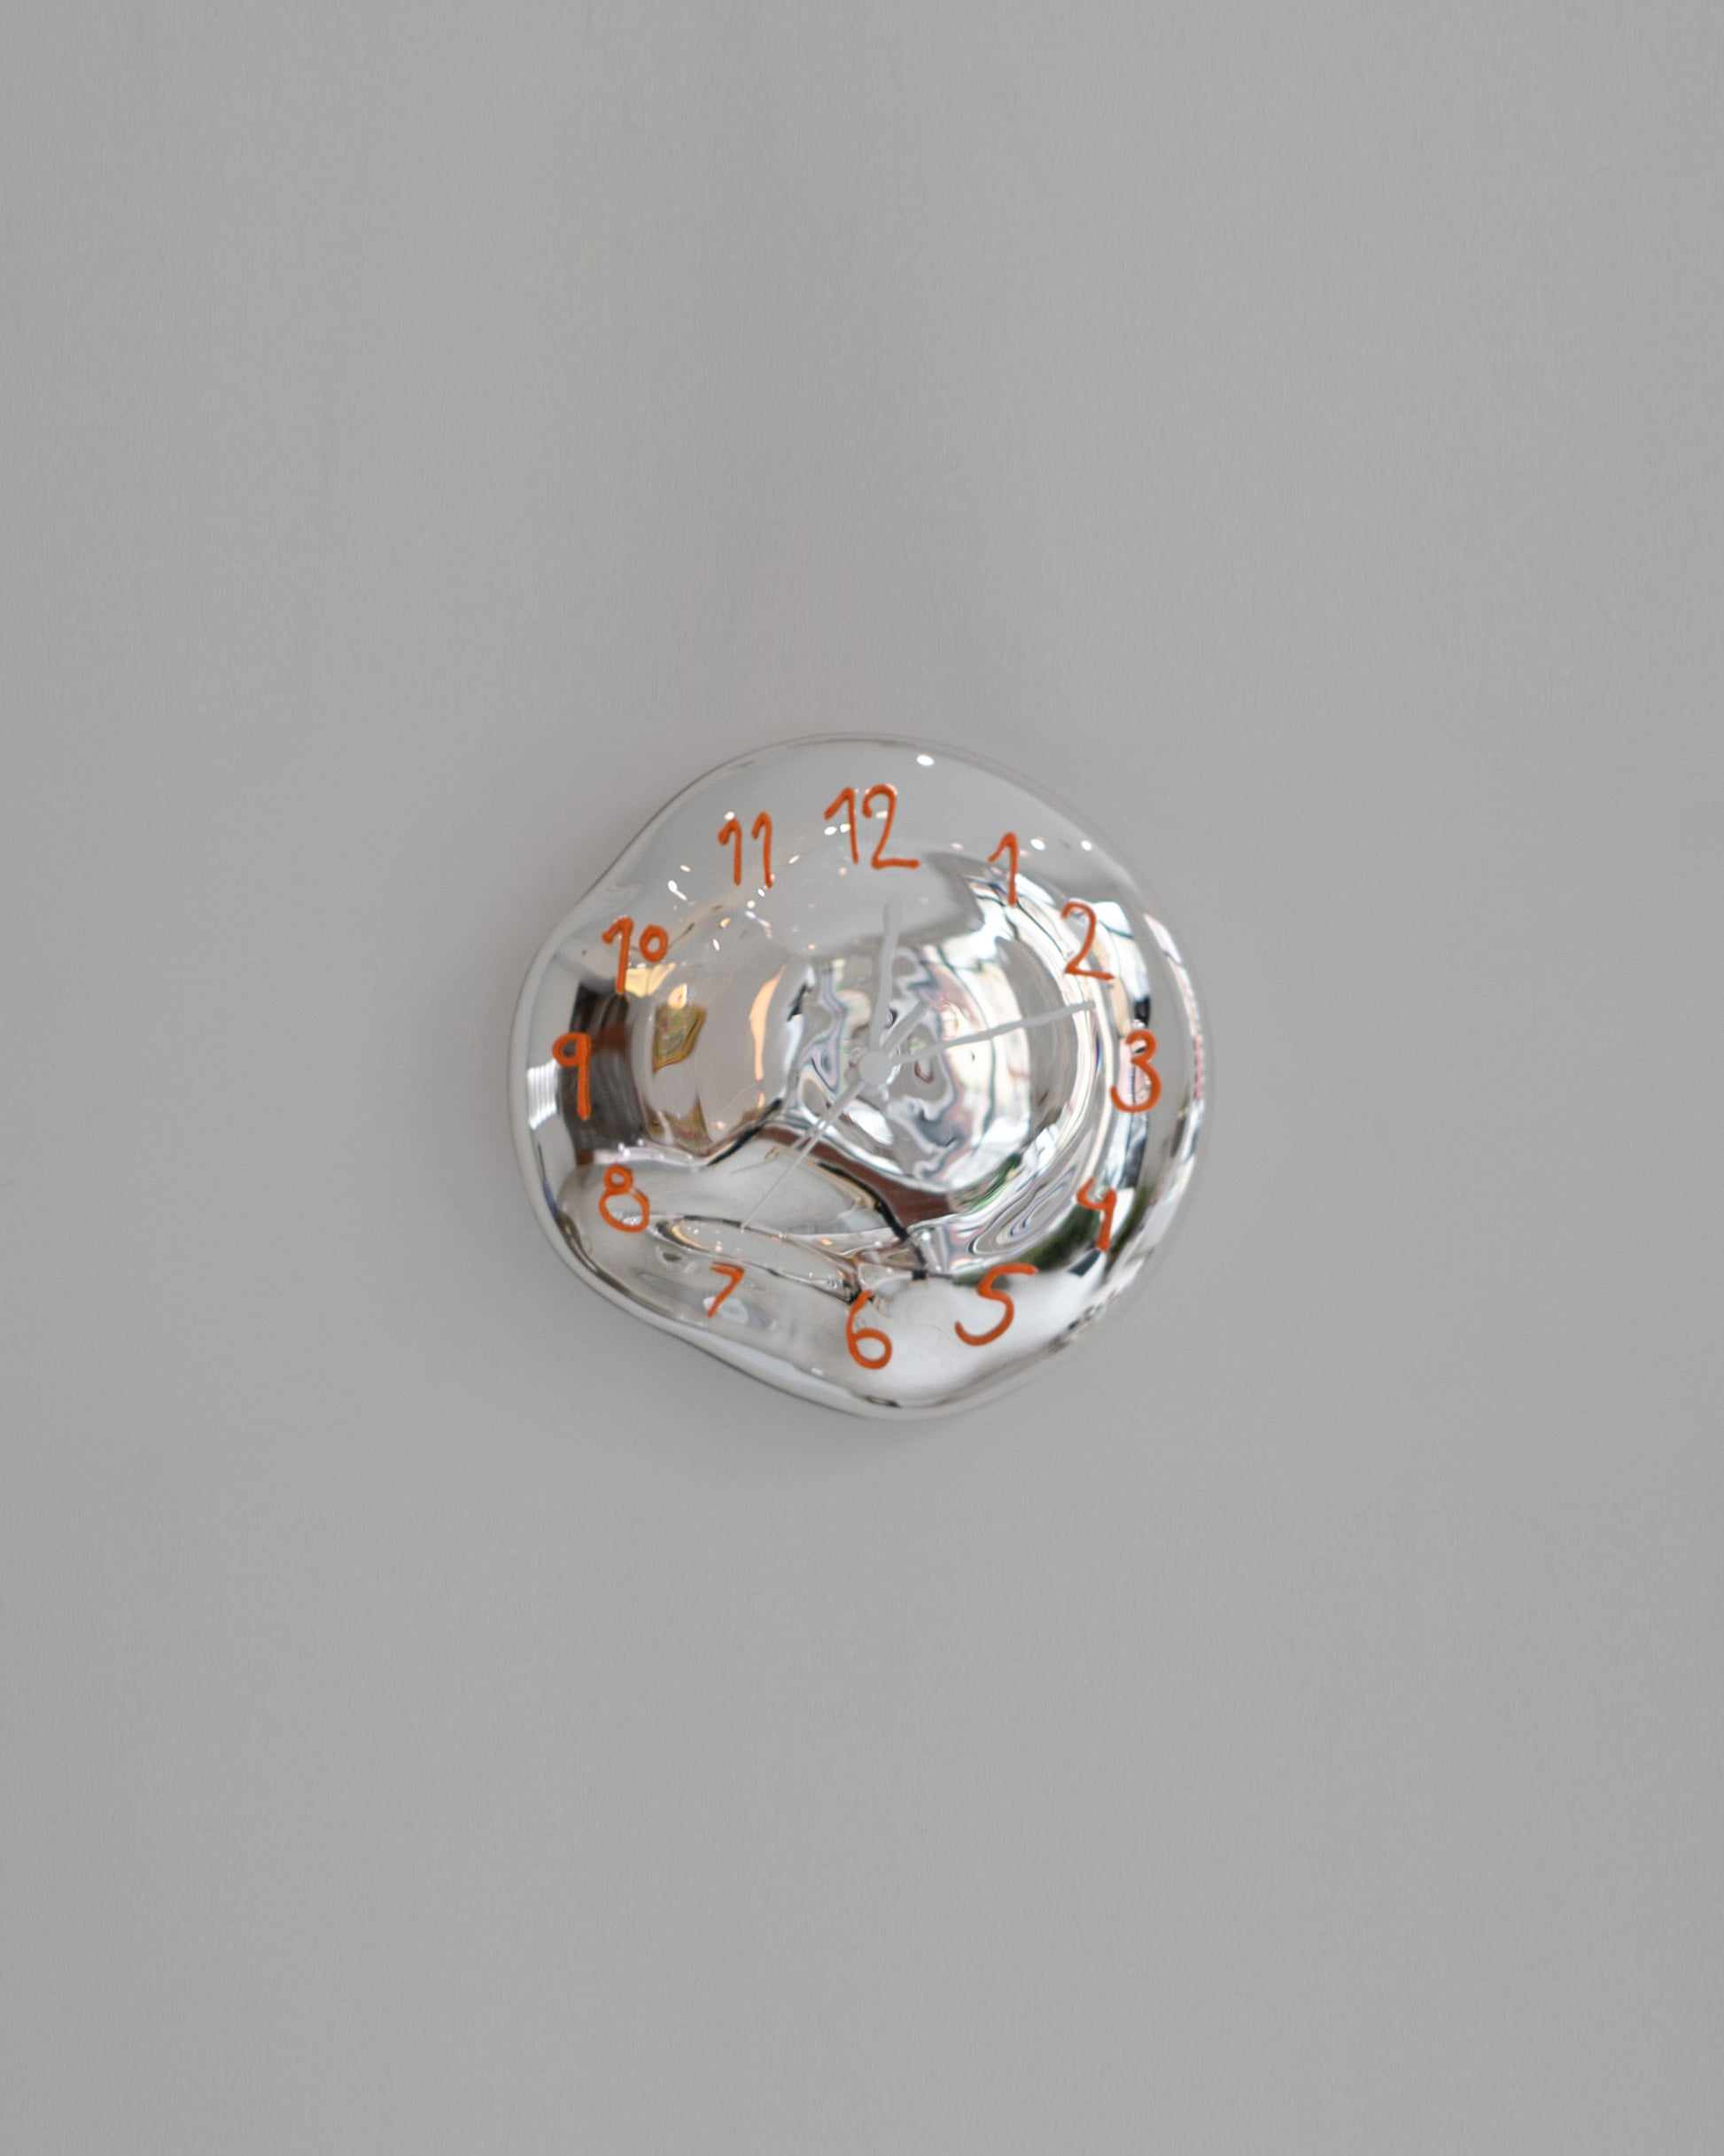 Silje Lindrup White Hands Two Orange Glass Wall Clock on light color background.